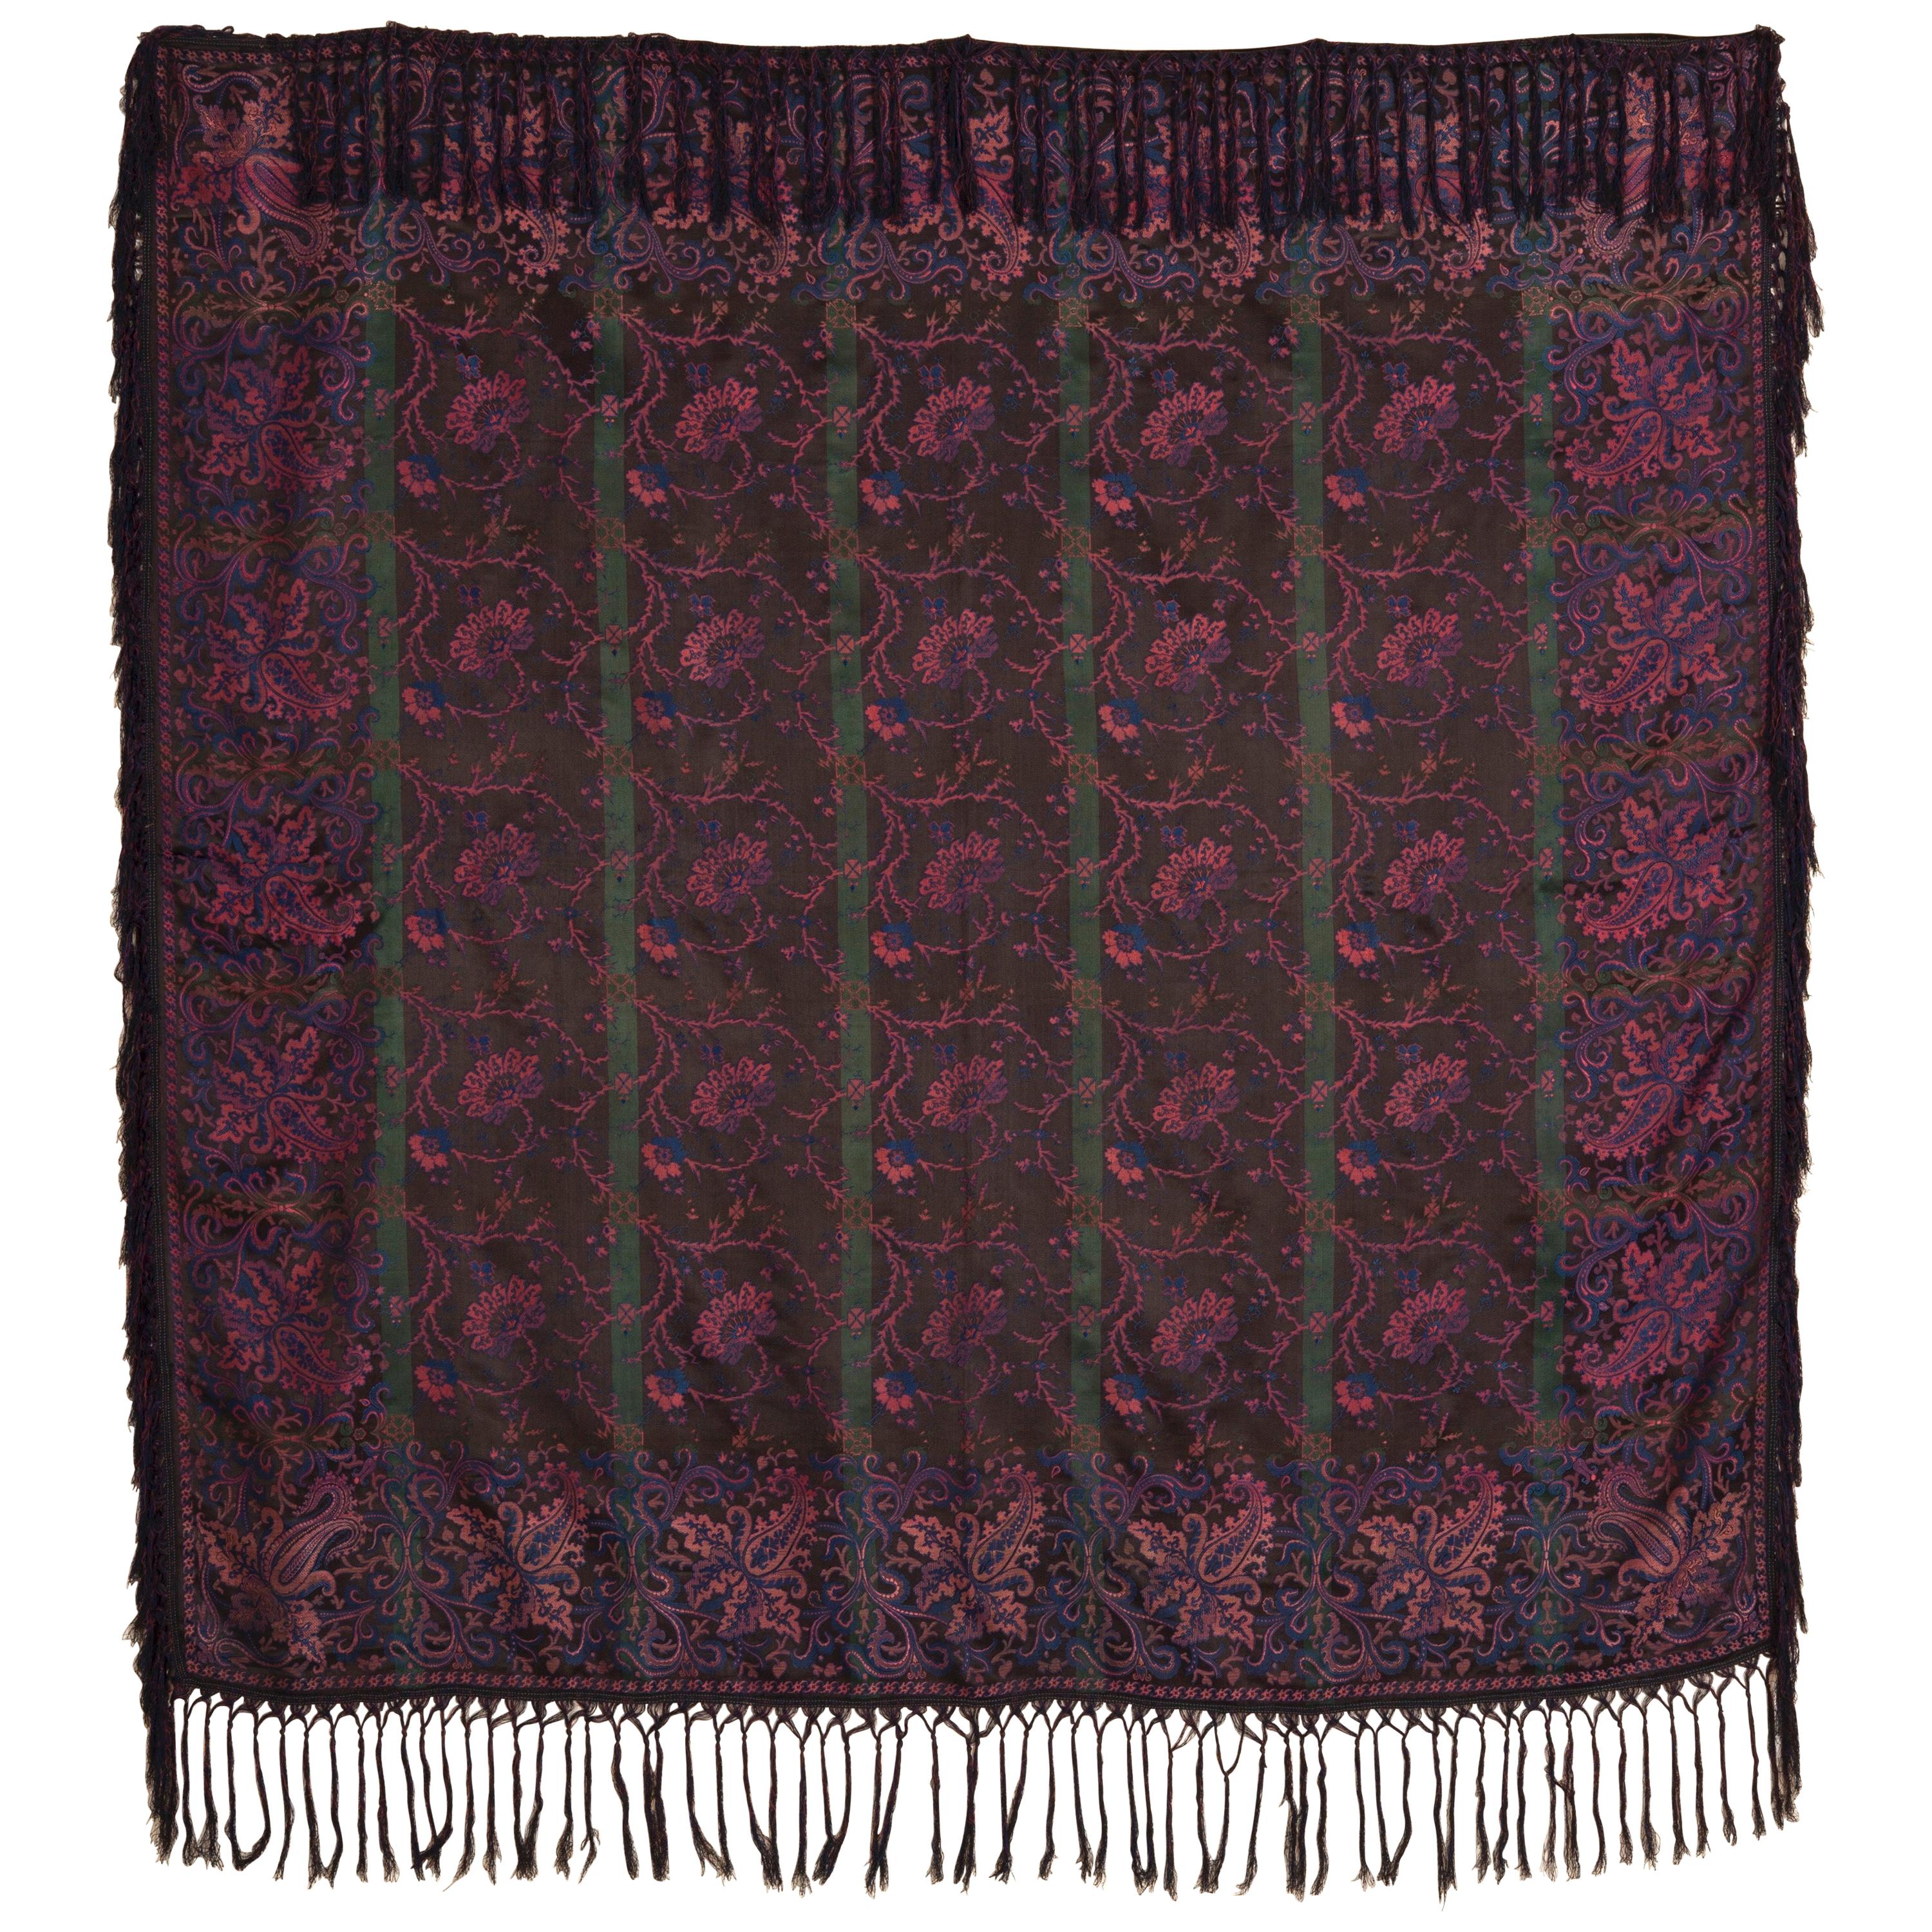 19th Century French Jacquard Woven Silk Shawl For Sale